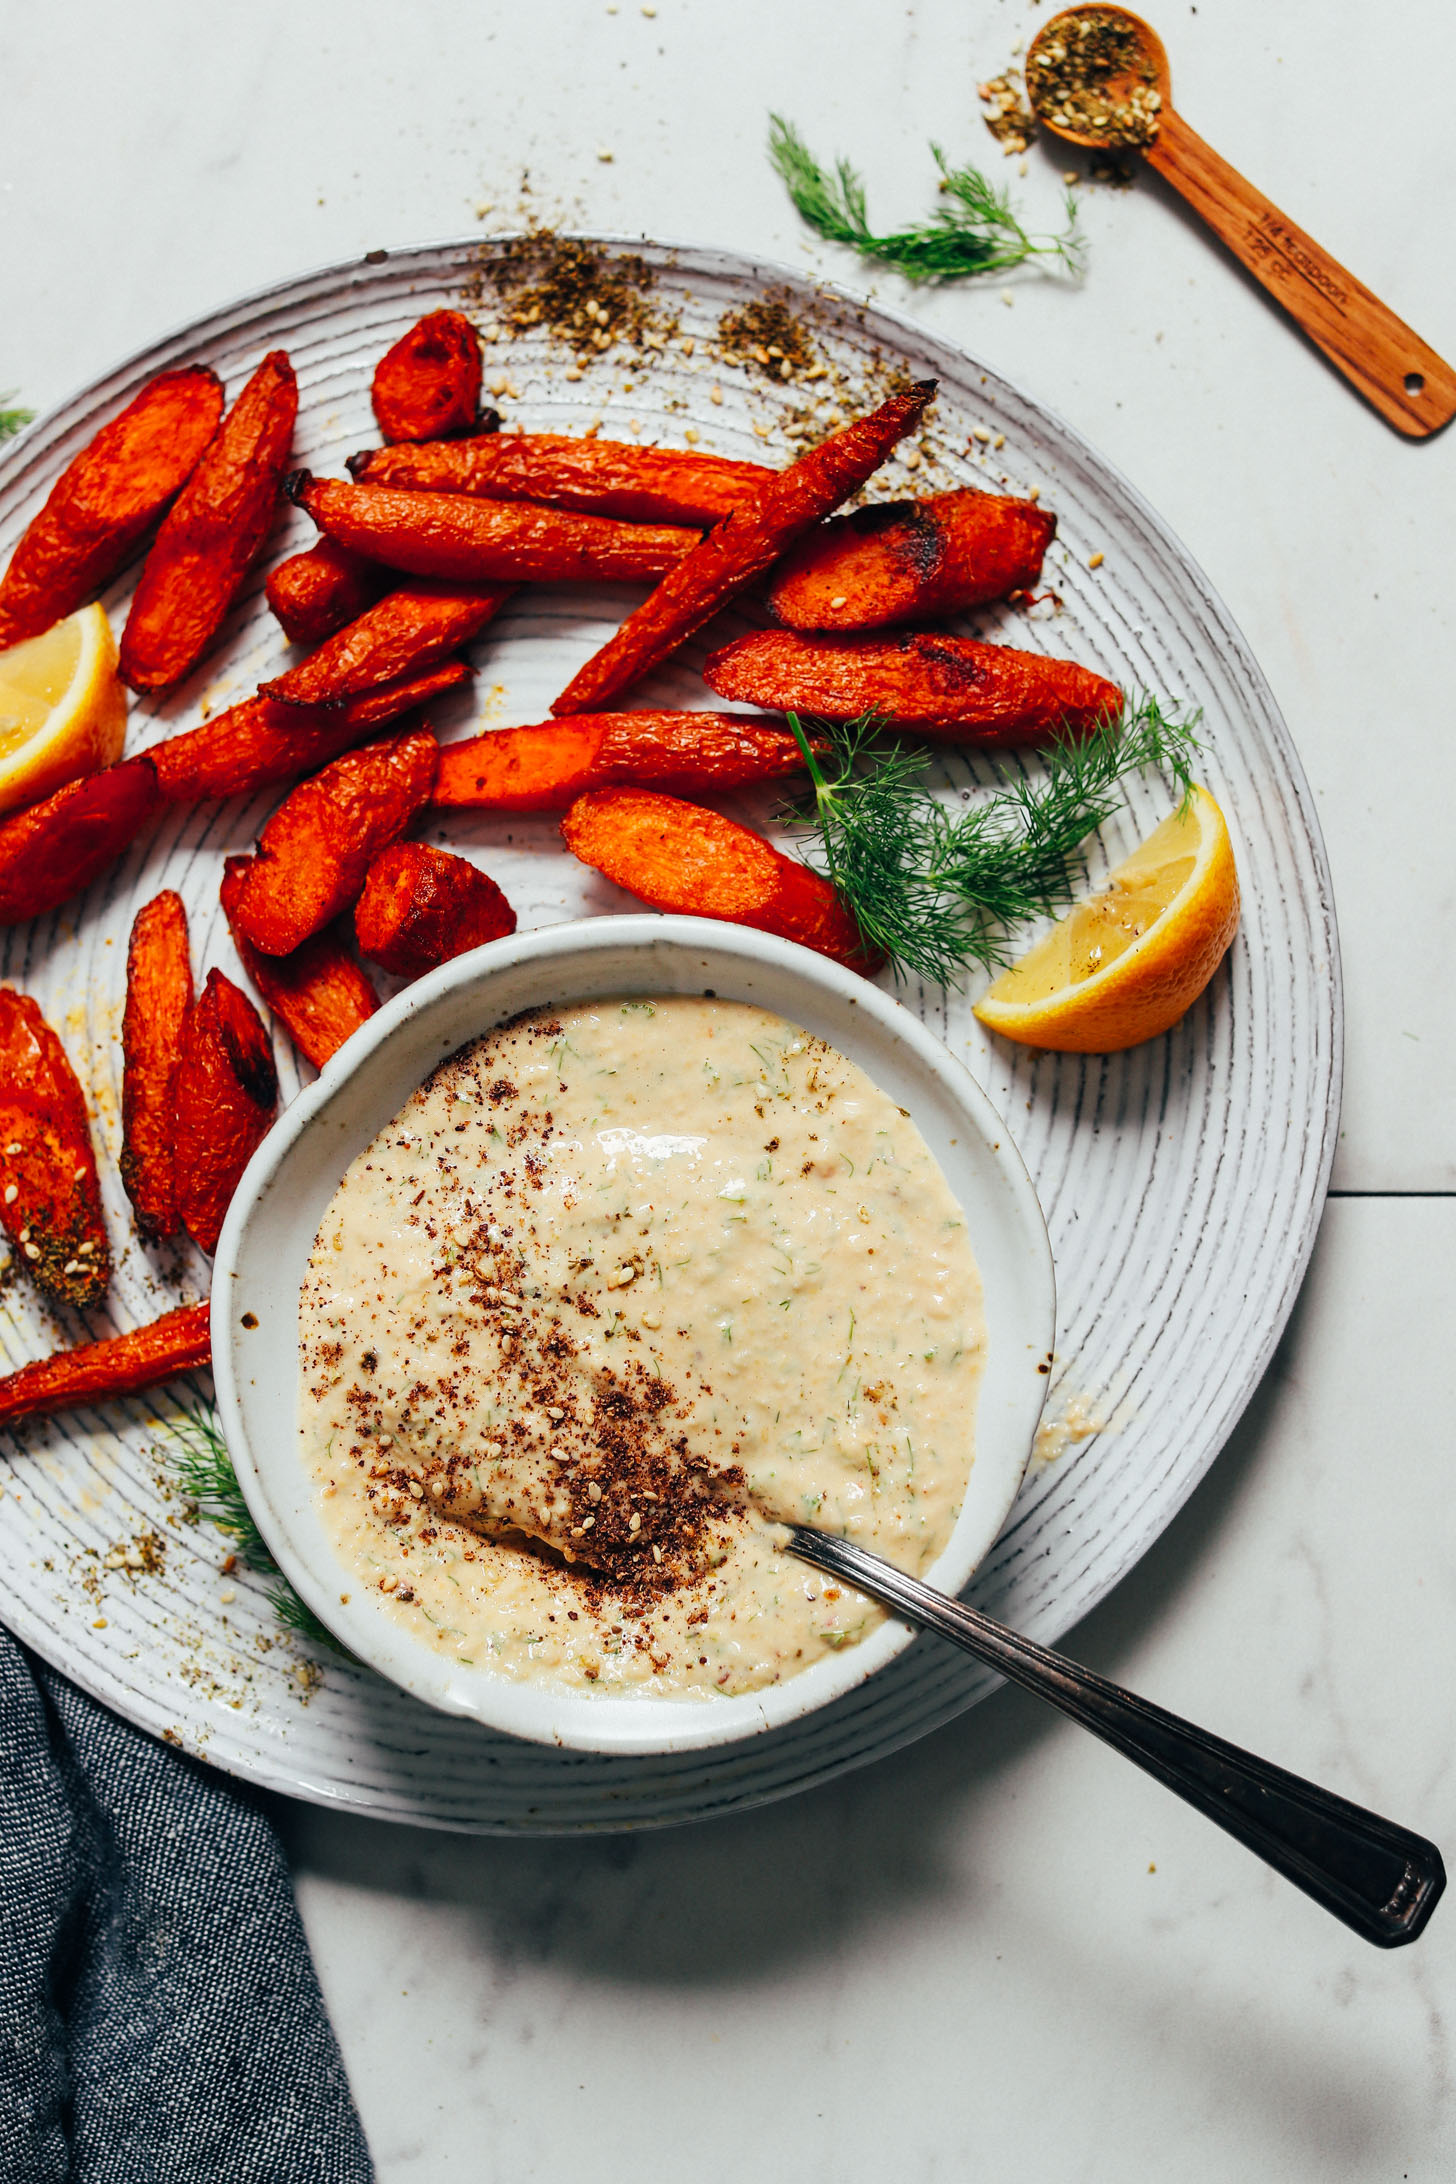 Bowl of Dill Garlic Sauce with roasted carrots next to it